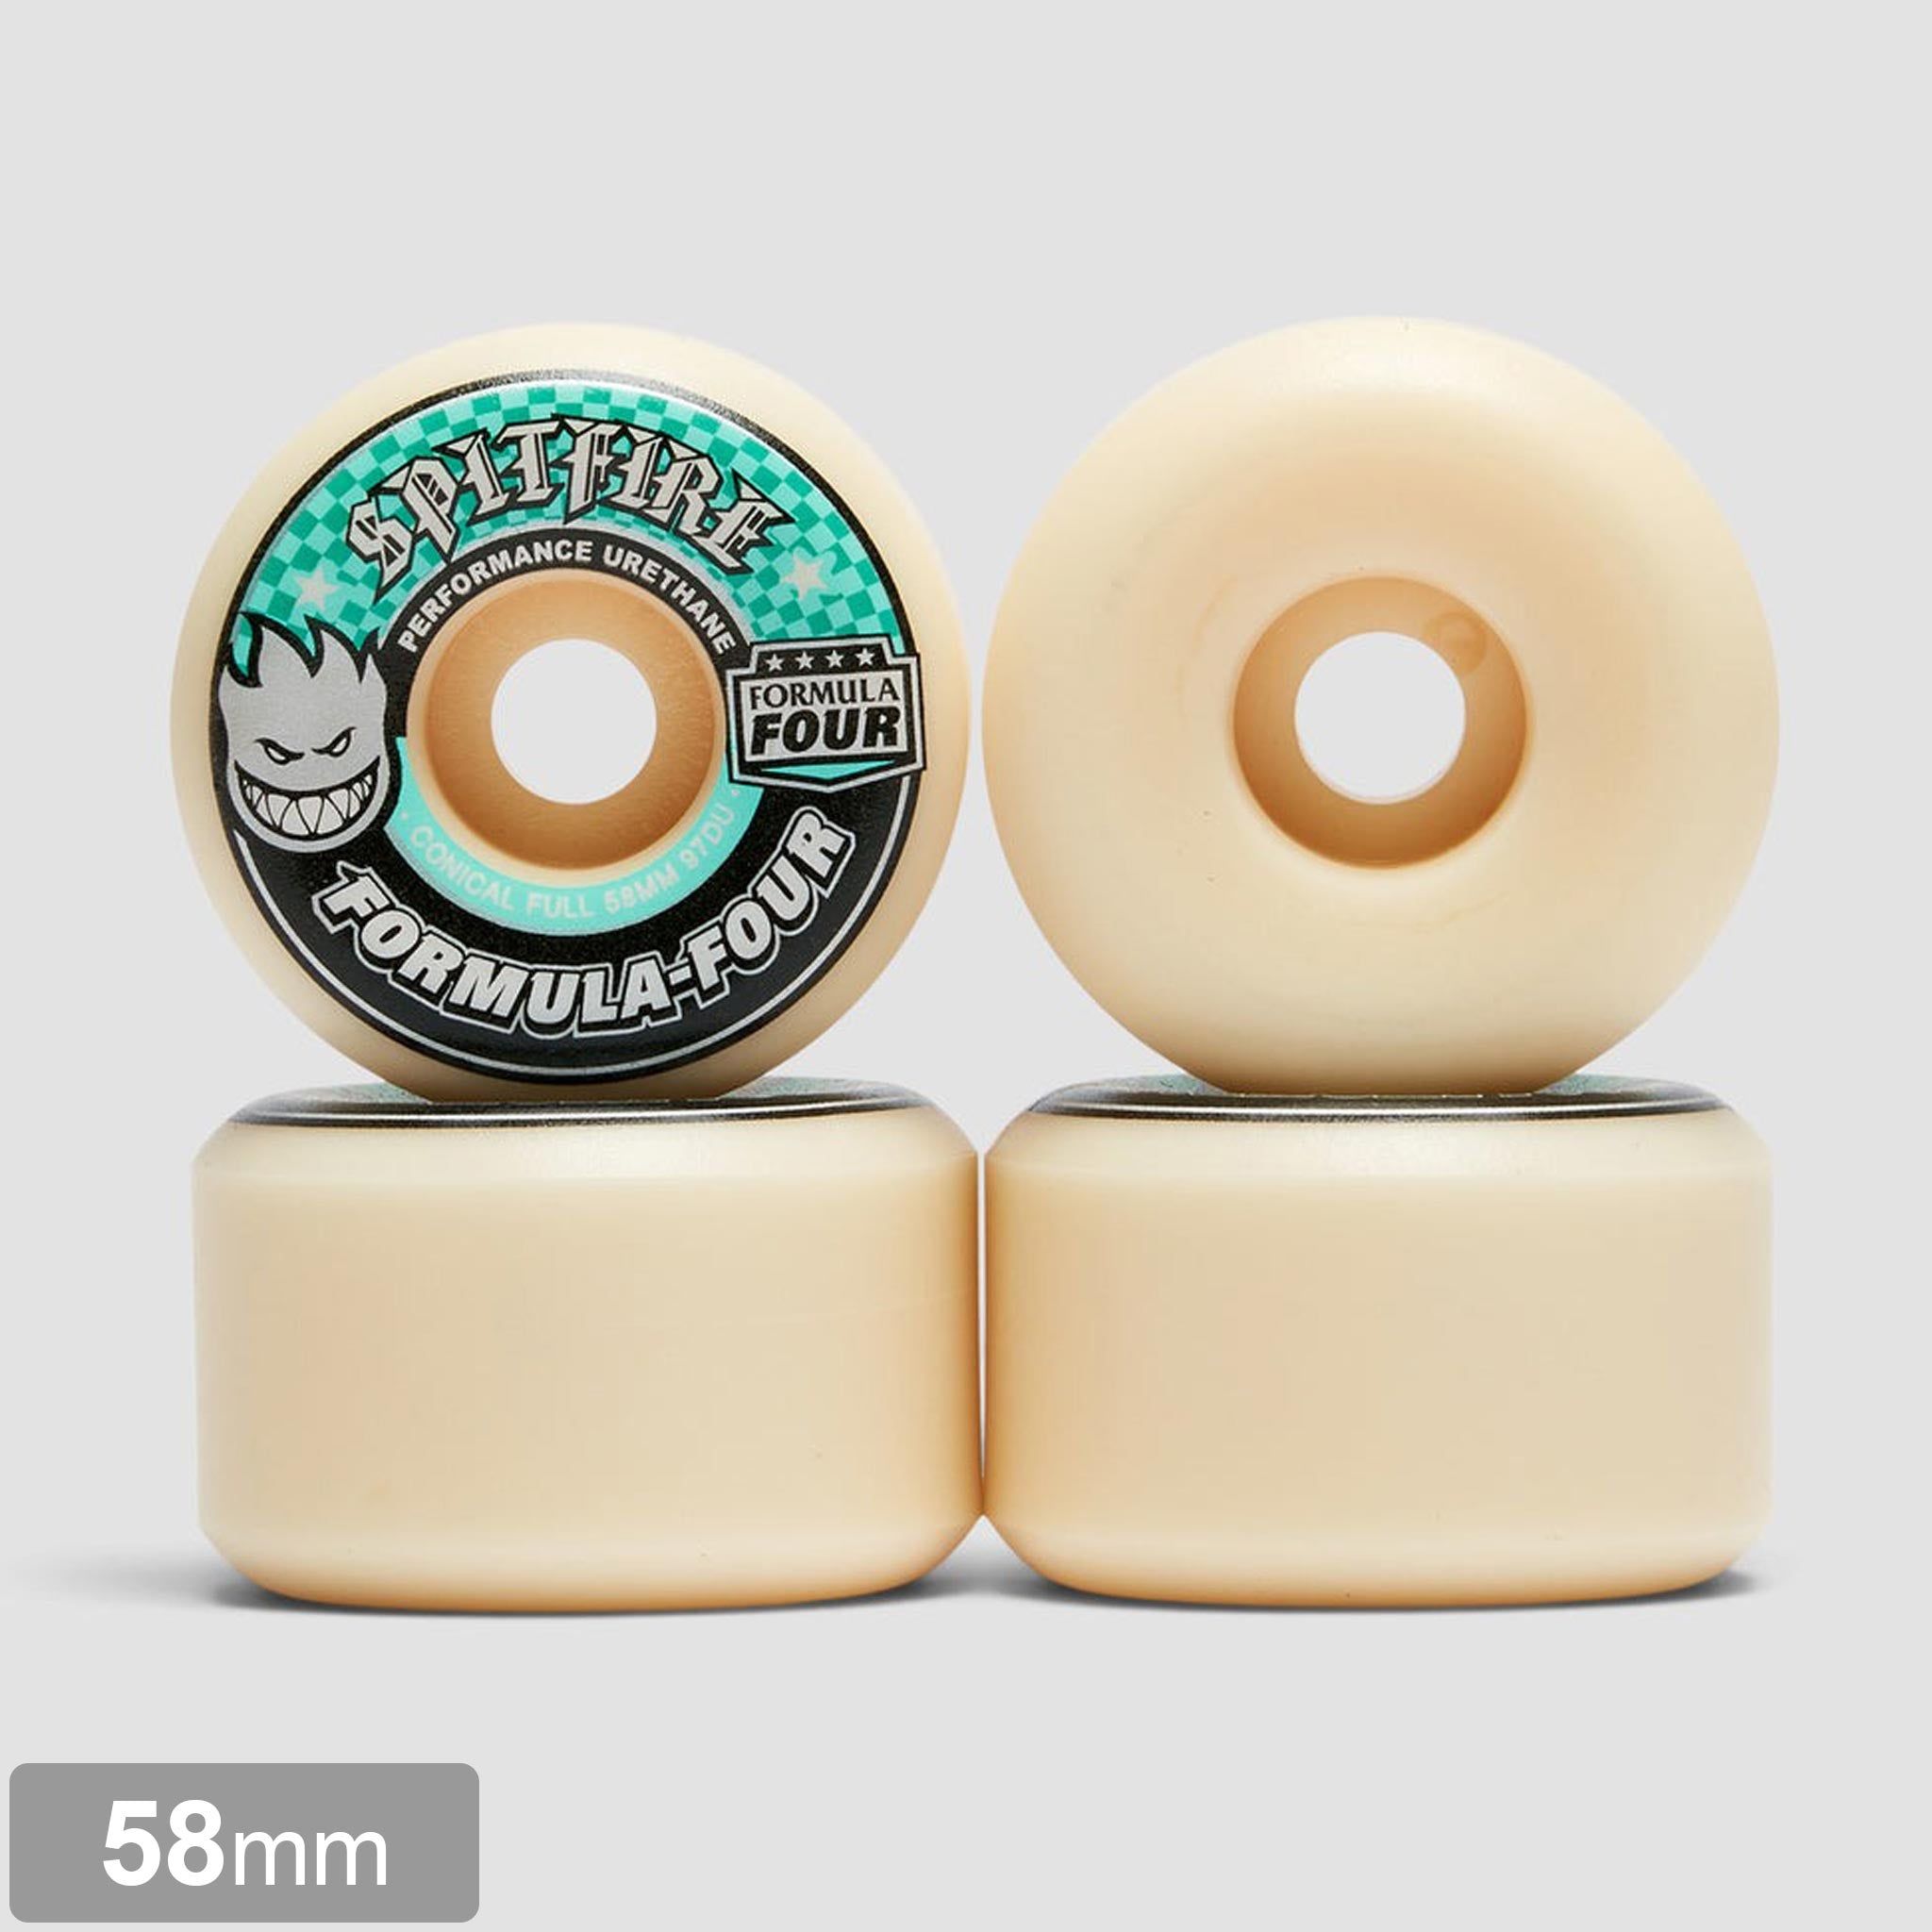 SPITFIRE FORMULA FOUR CONICAL FULL 97A 58mm 【スピットファイヤー 